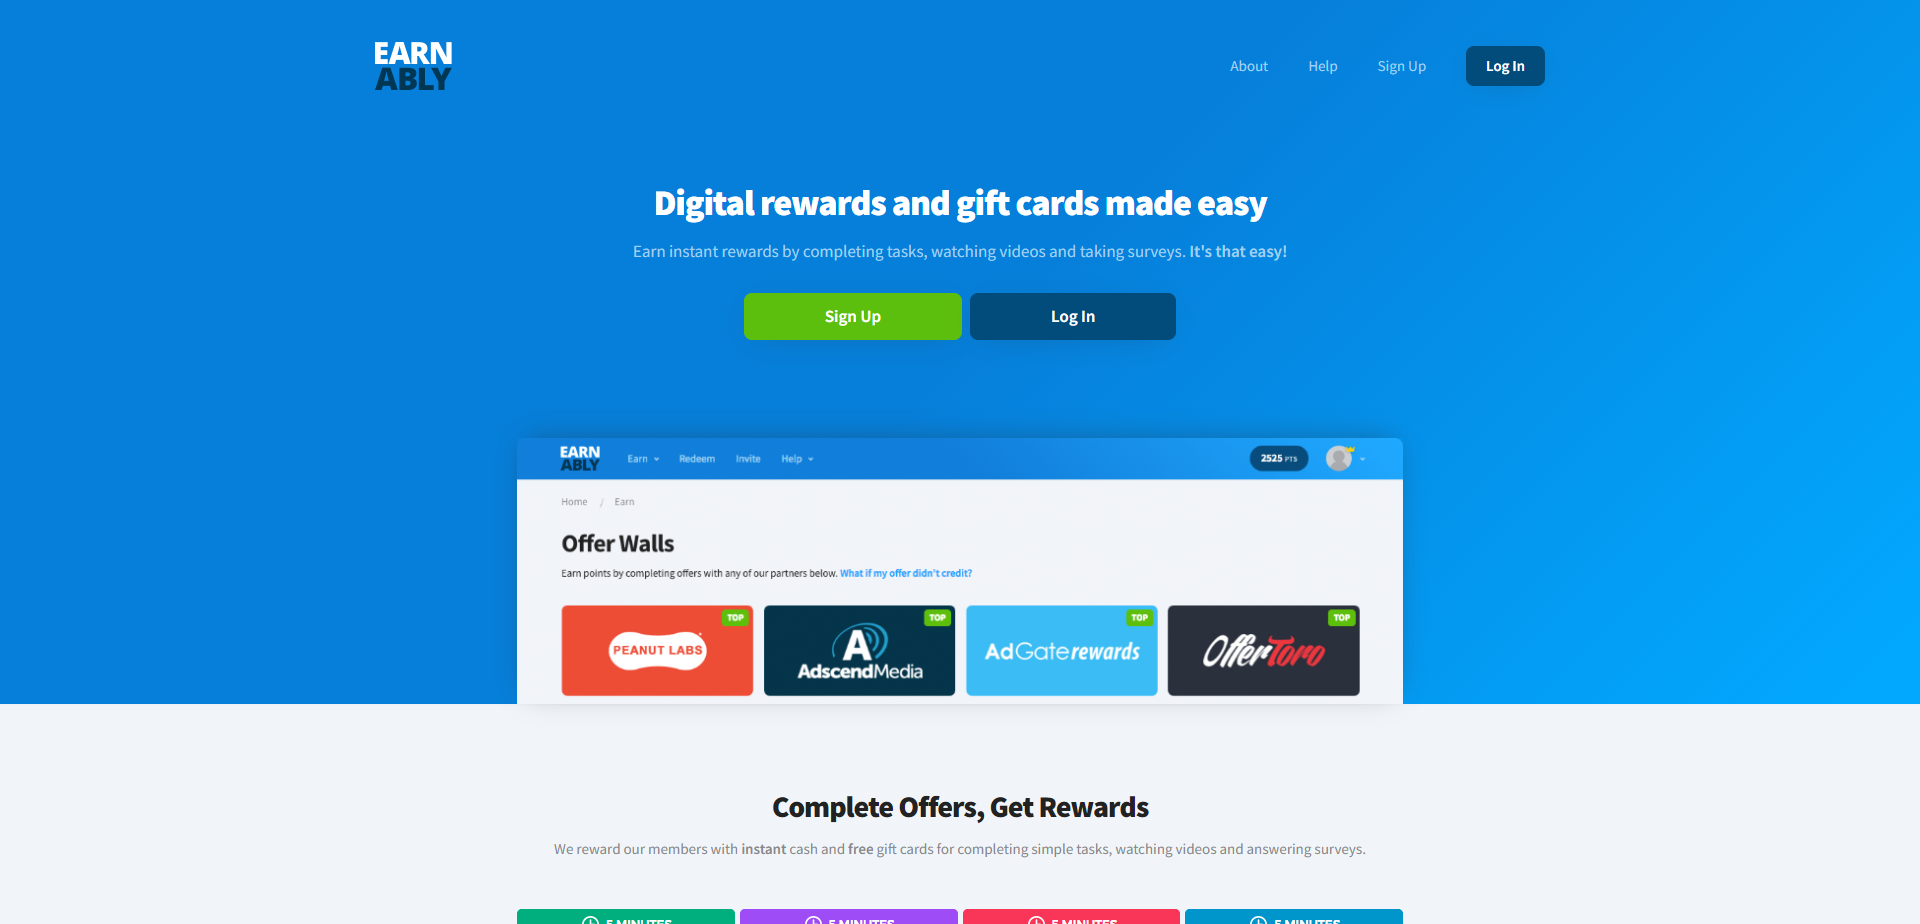 Referral Landing Page for Earnably